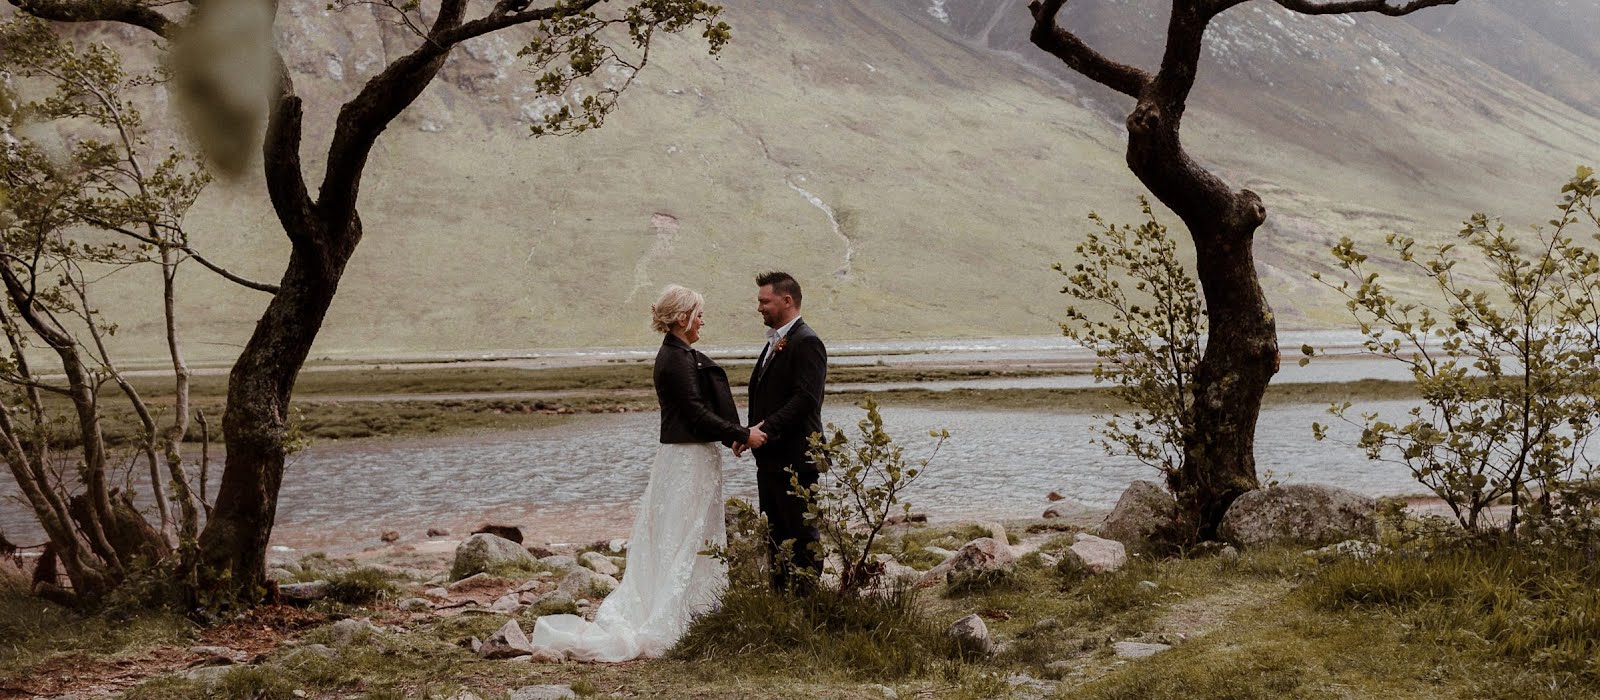 Real Weddings: This Irish couple had a dreamy elopement in the Scottish Highlands